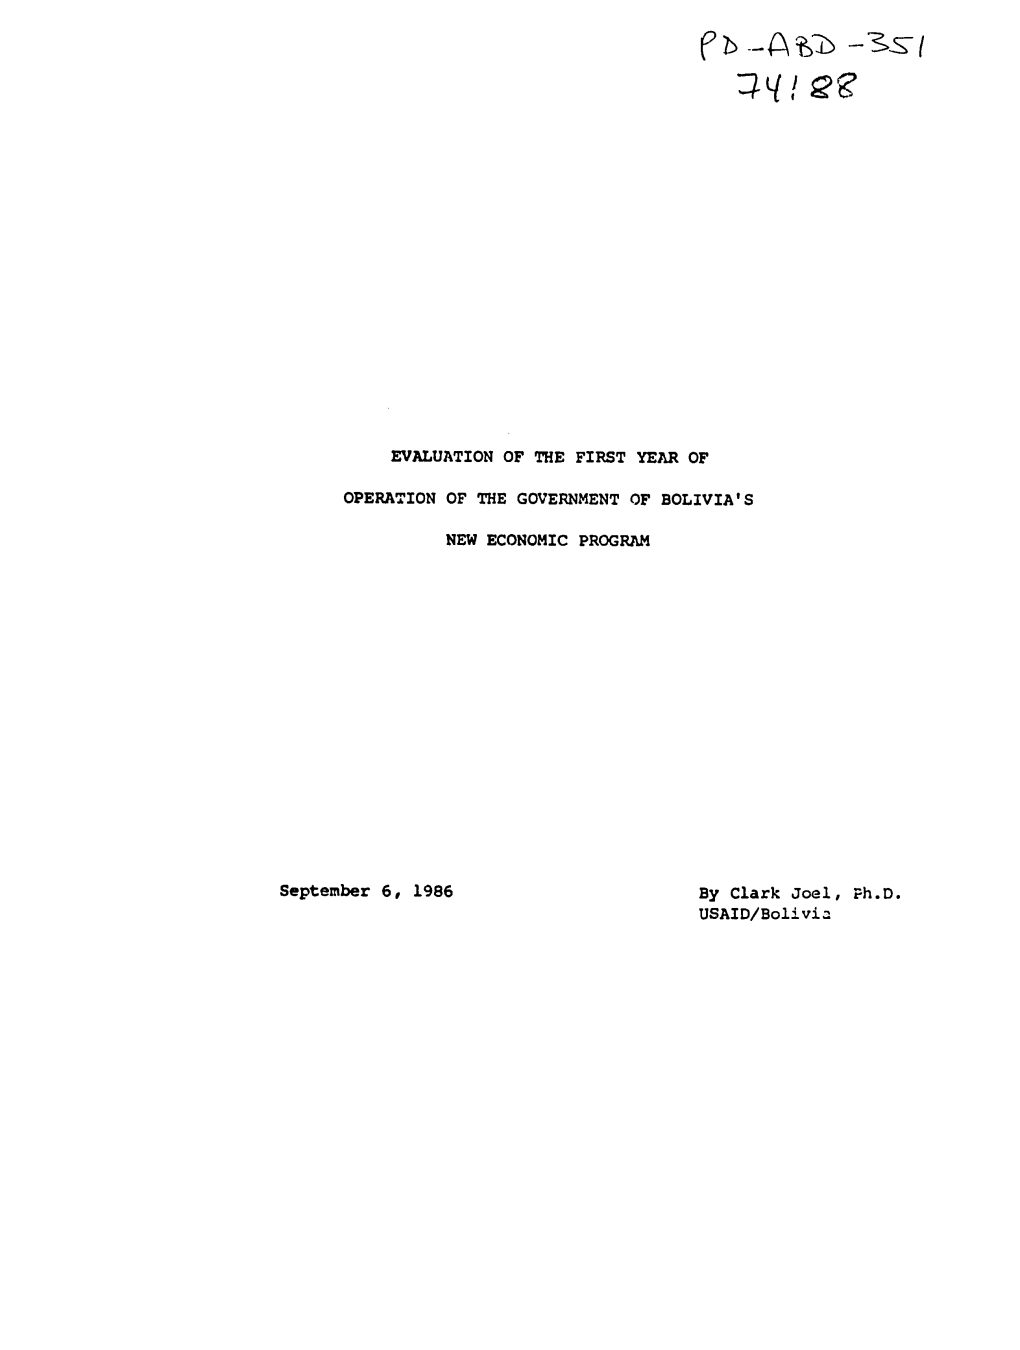 EVALUATION of the FIRST YEAR of OPERATION of the GOVERNMENT of BOLIVIA's NEW ECONOMIC PROGRAM September 6, 1986 by Clark Jo